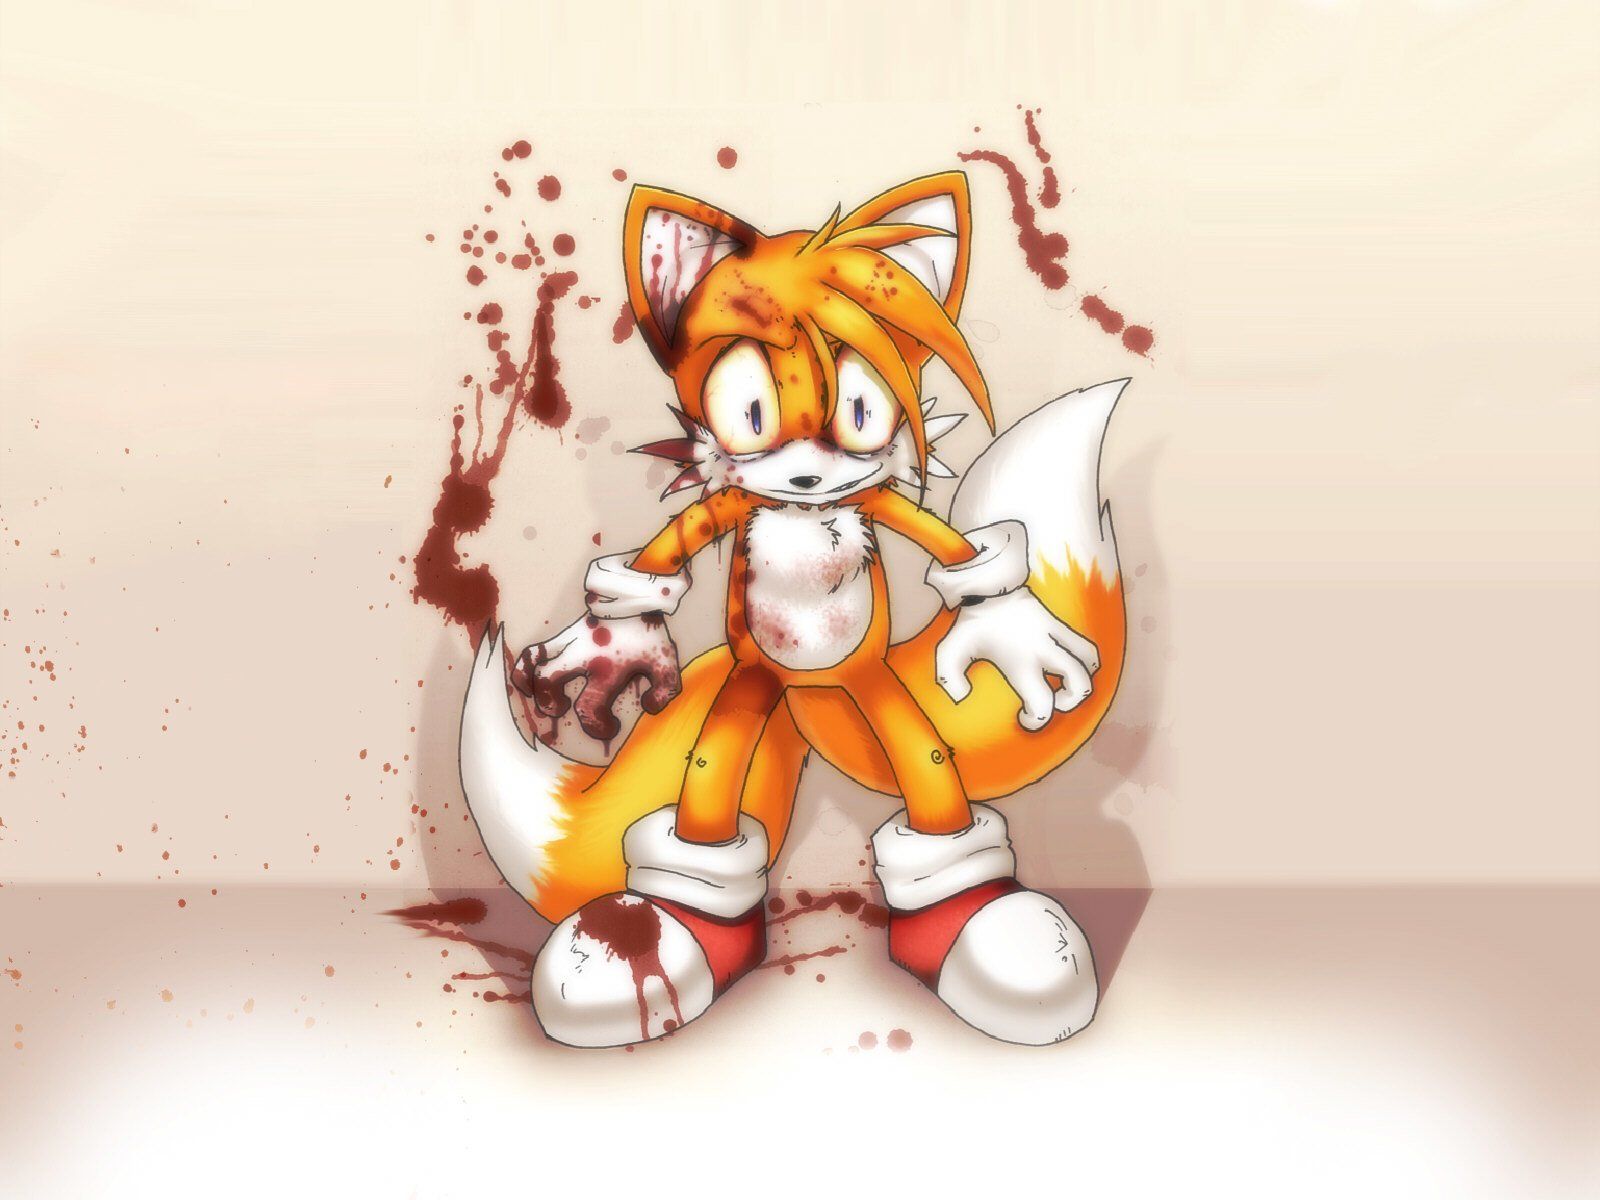 Sonic and Tails Wallpapers.